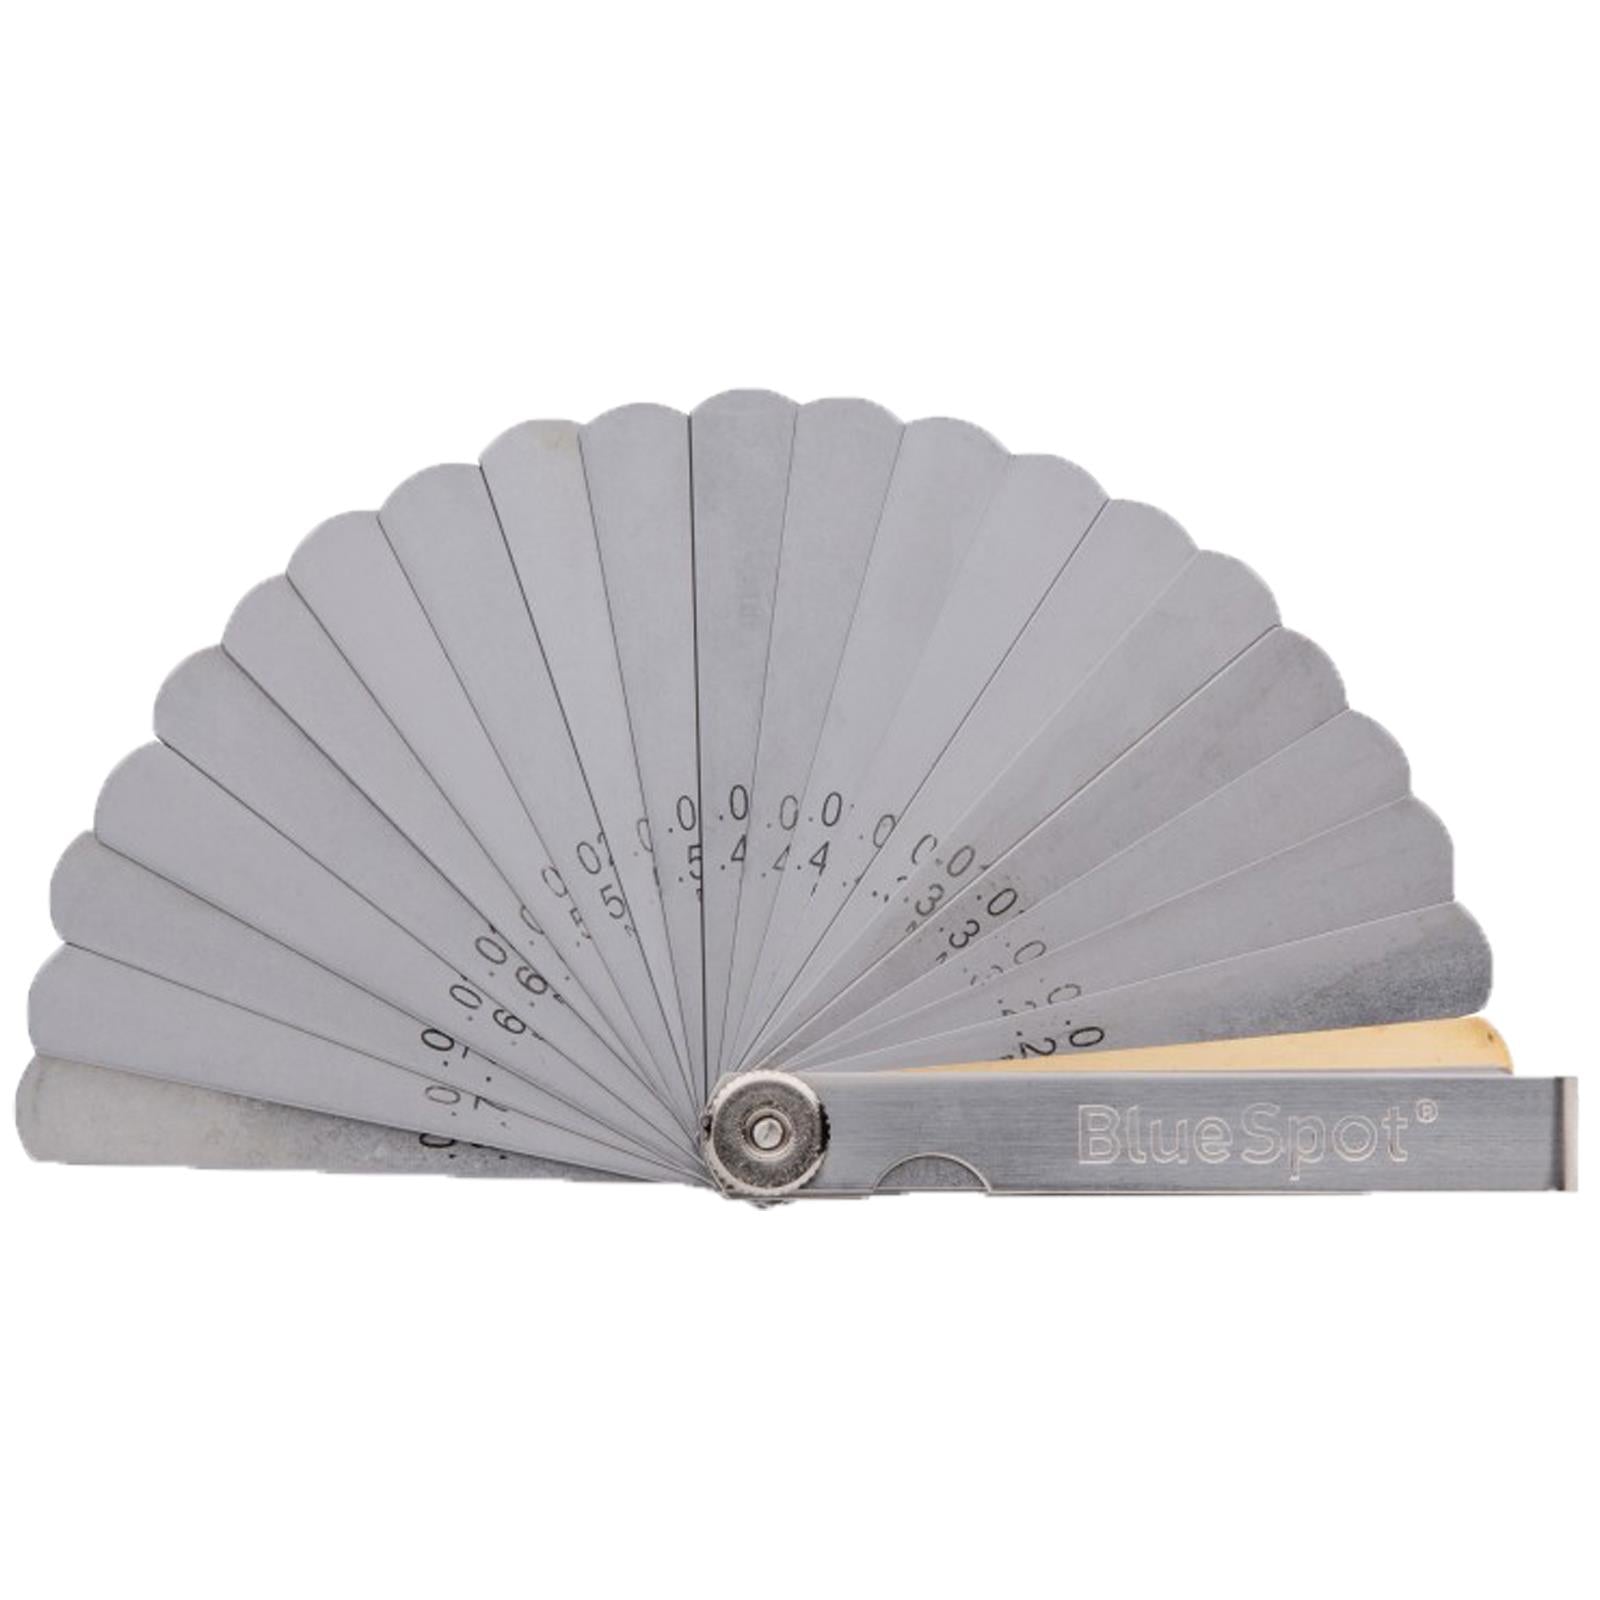 BlueSpot Feeler Gauge 32 Blade Metric and Imperial Sizes